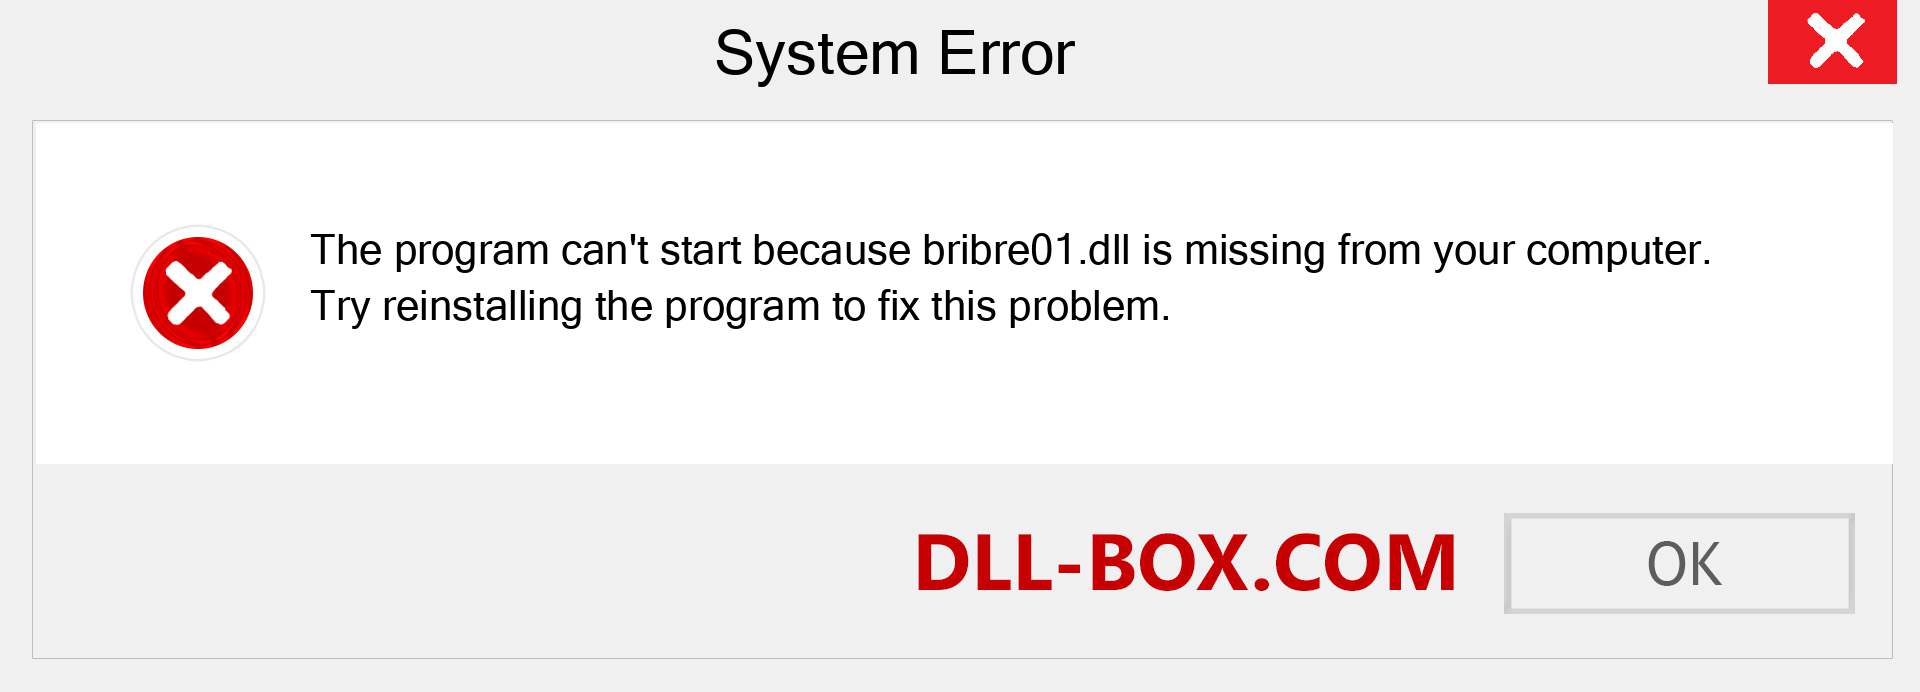  bribre01.dll file is missing?. Download for Windows 7, 8, 10 - Fix  bribre01 dll Missing Error on Windows, photos, images